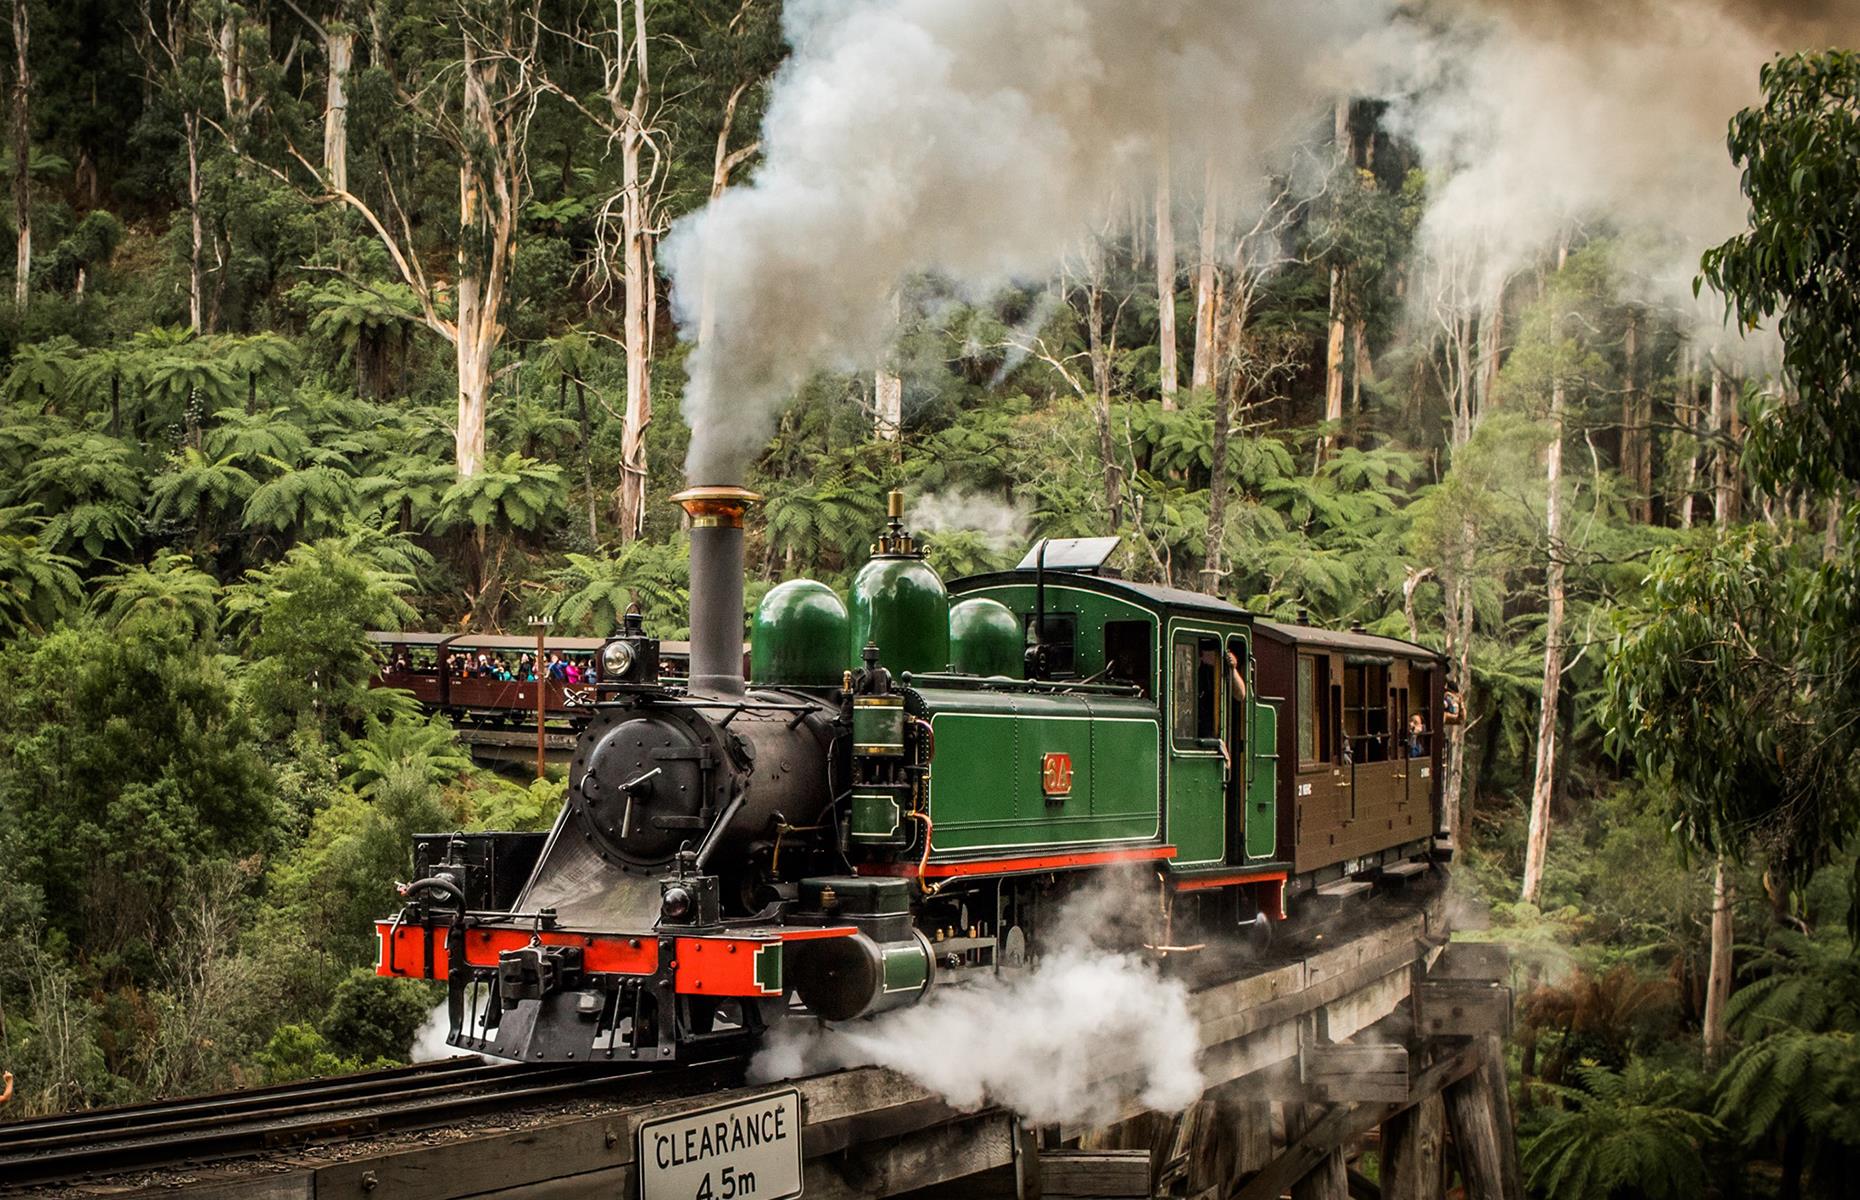 <p>Often named Australia's finest heritage railway, this is one for serious train fans and history buffs. Harking back to a by-gone era when steam locomotives ruled the rails, <a href="https://puffingbilly.com.au/">Puffing Billy</a> is a relic of the 1920s that still races through the Dandenong Ranges on a one-and-a-half-hour journey. The only survivor of a failed attempt at introducing a series of narrow-gauge lines by the then-named Victorian Railways, Puffing Billy is a piece of living history. The journey goes from Belgrave into Sherbrooke Forest, to the intermediate station of Emerald and onto the historic township of Gembrook.</p>